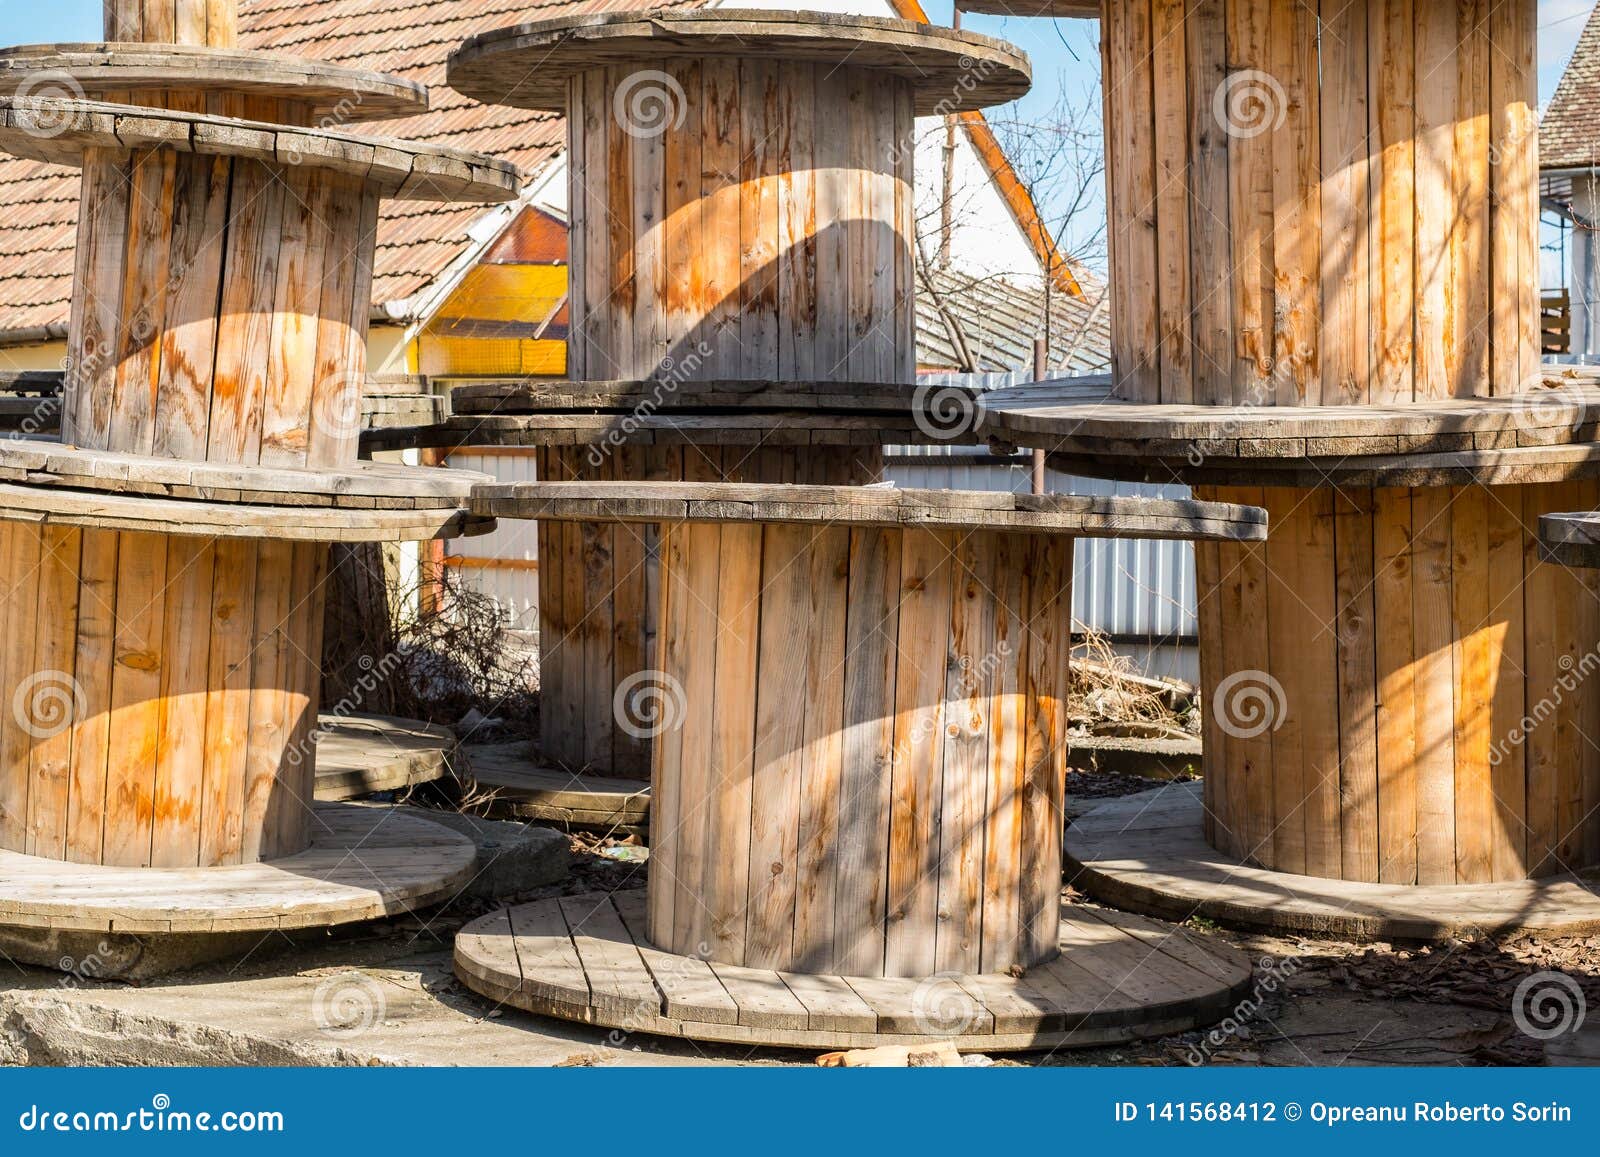 Wheel of Wooden Electric Wire Stock Photo - Image of building, material ...